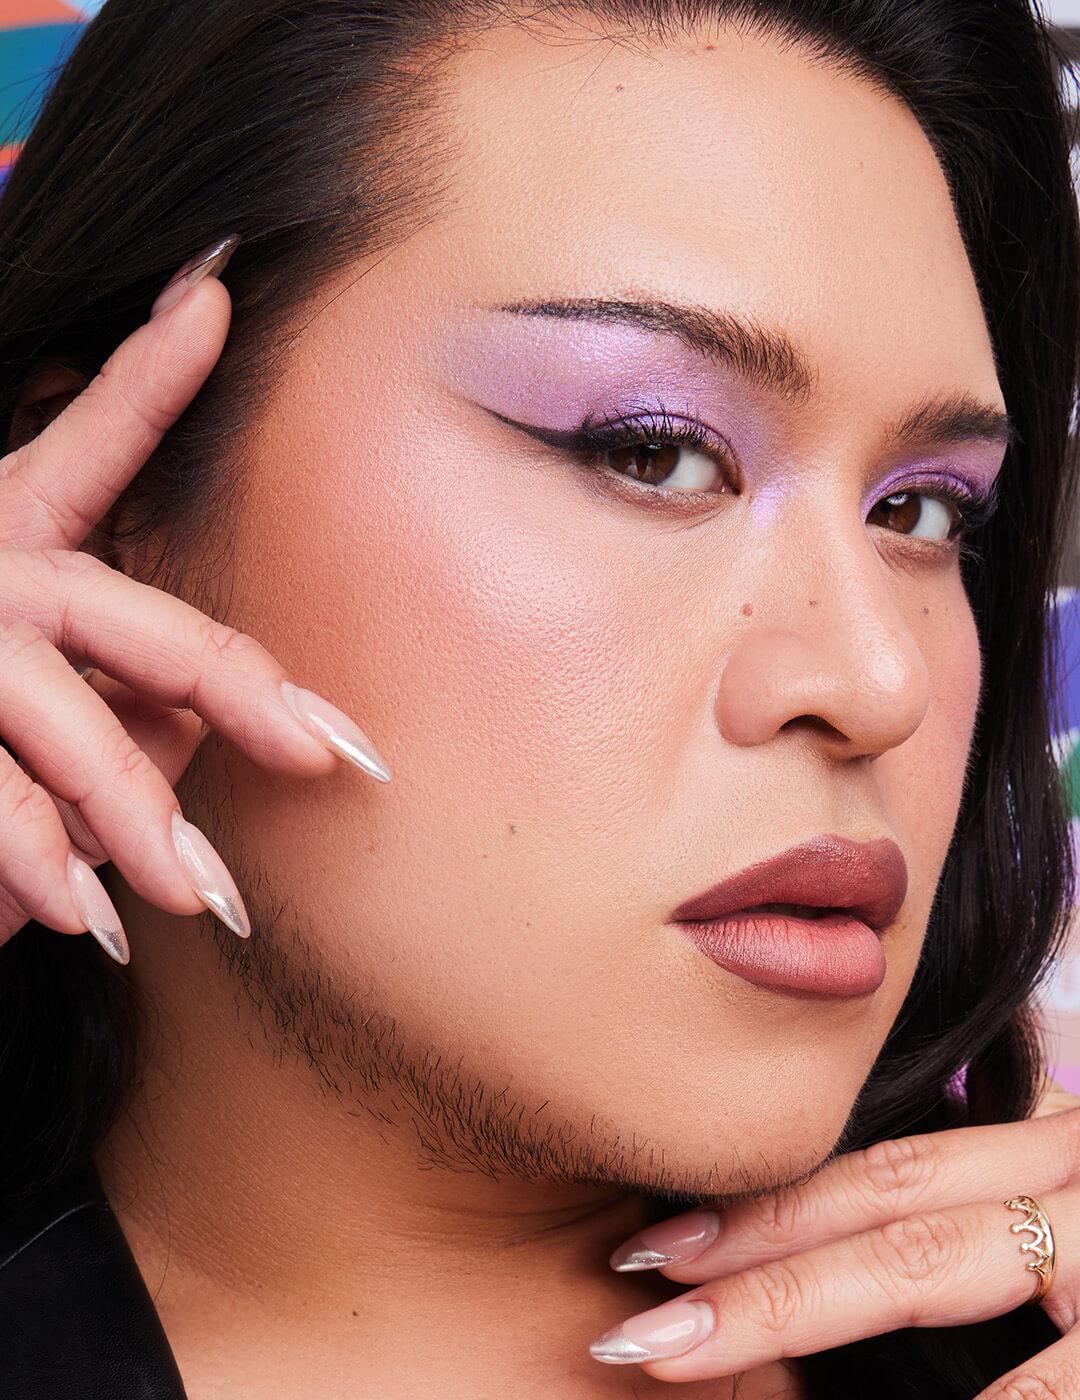 Close-up of Alyx Liu posing and rocking a shimmery purple eyeshadow look with winged eyeliner